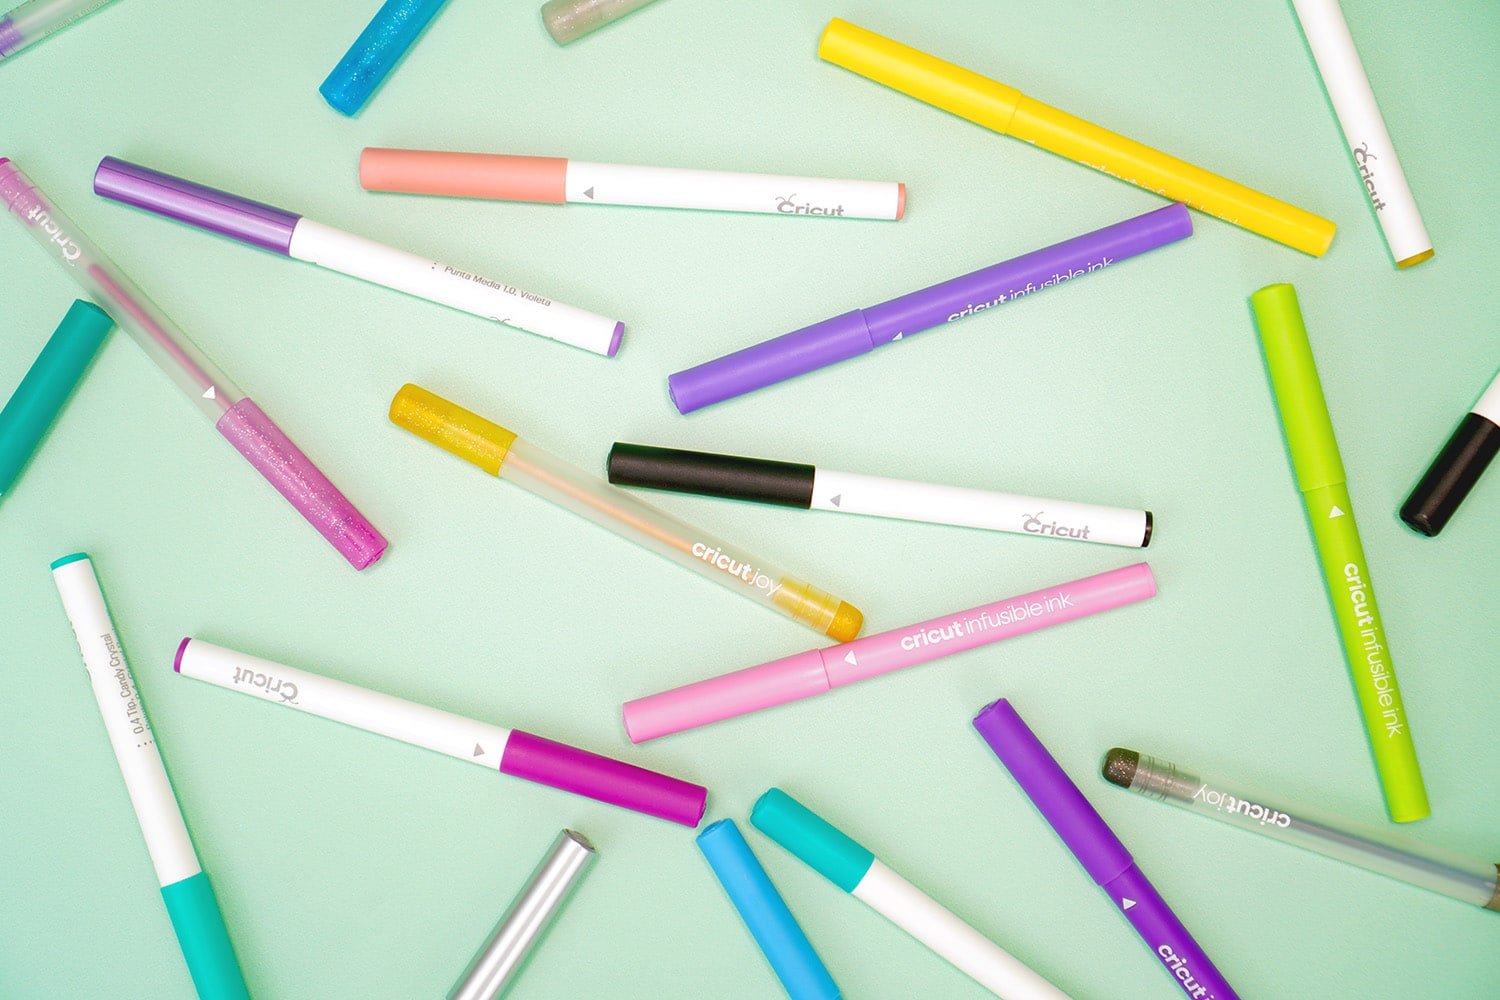 Various Cricut pens and markers scattered on a mint green background